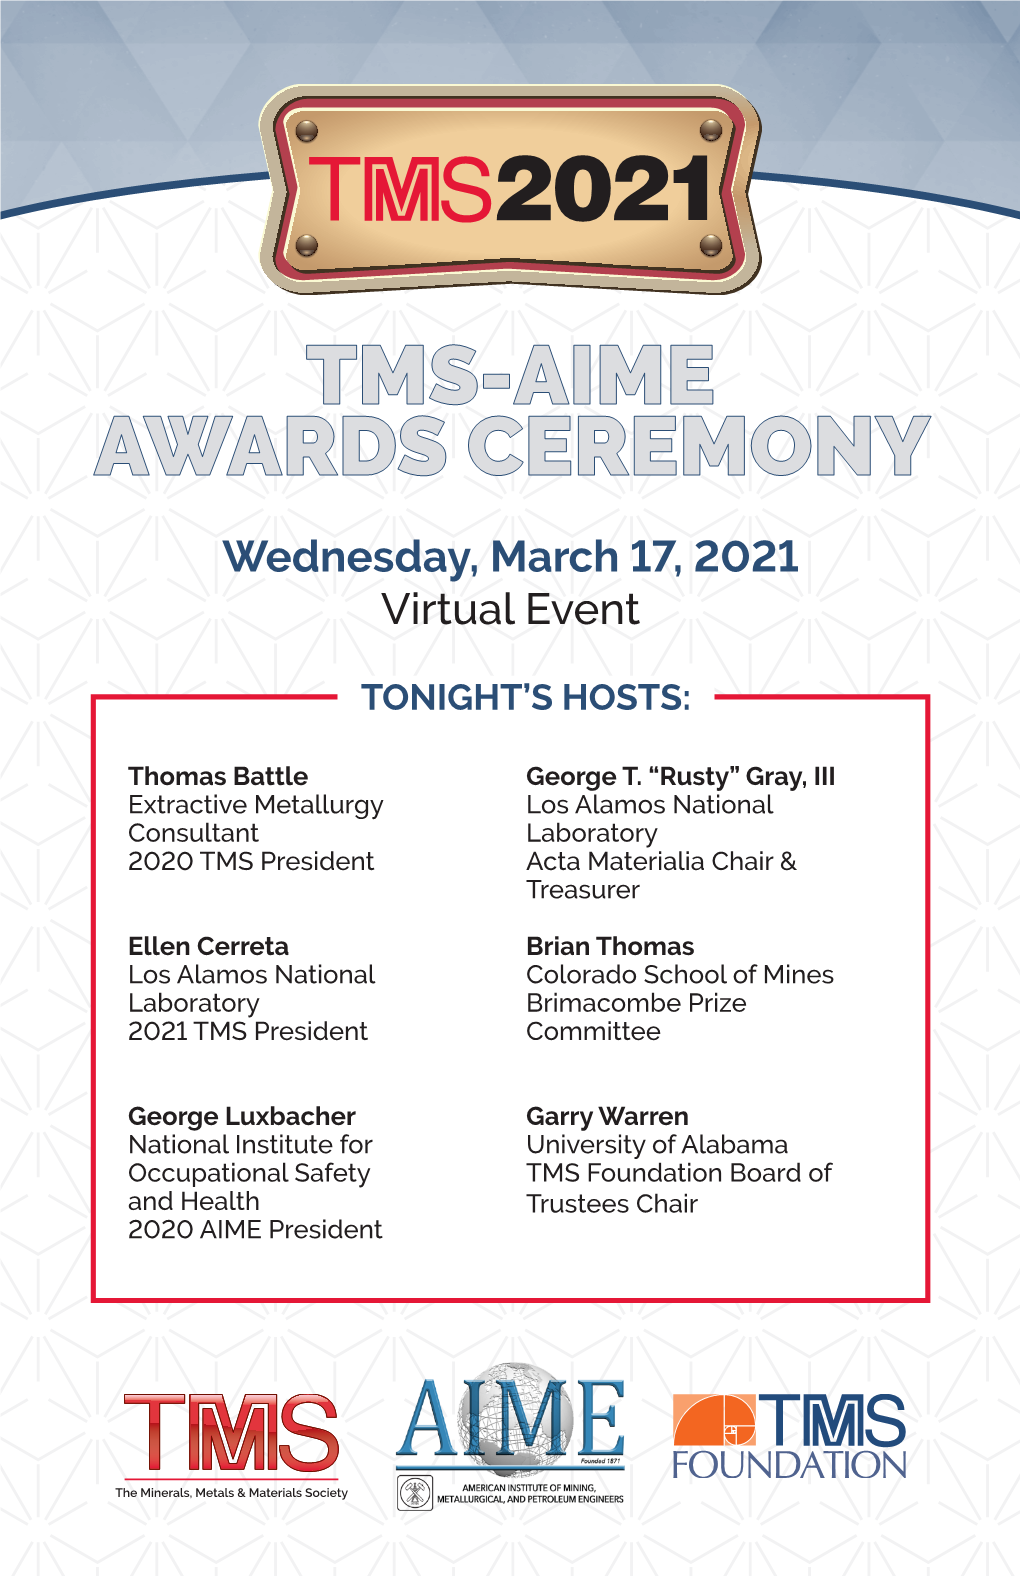 TMS-AIME AWARDS CEREMONY Wednesday, March 17, 2021 Virtual Event